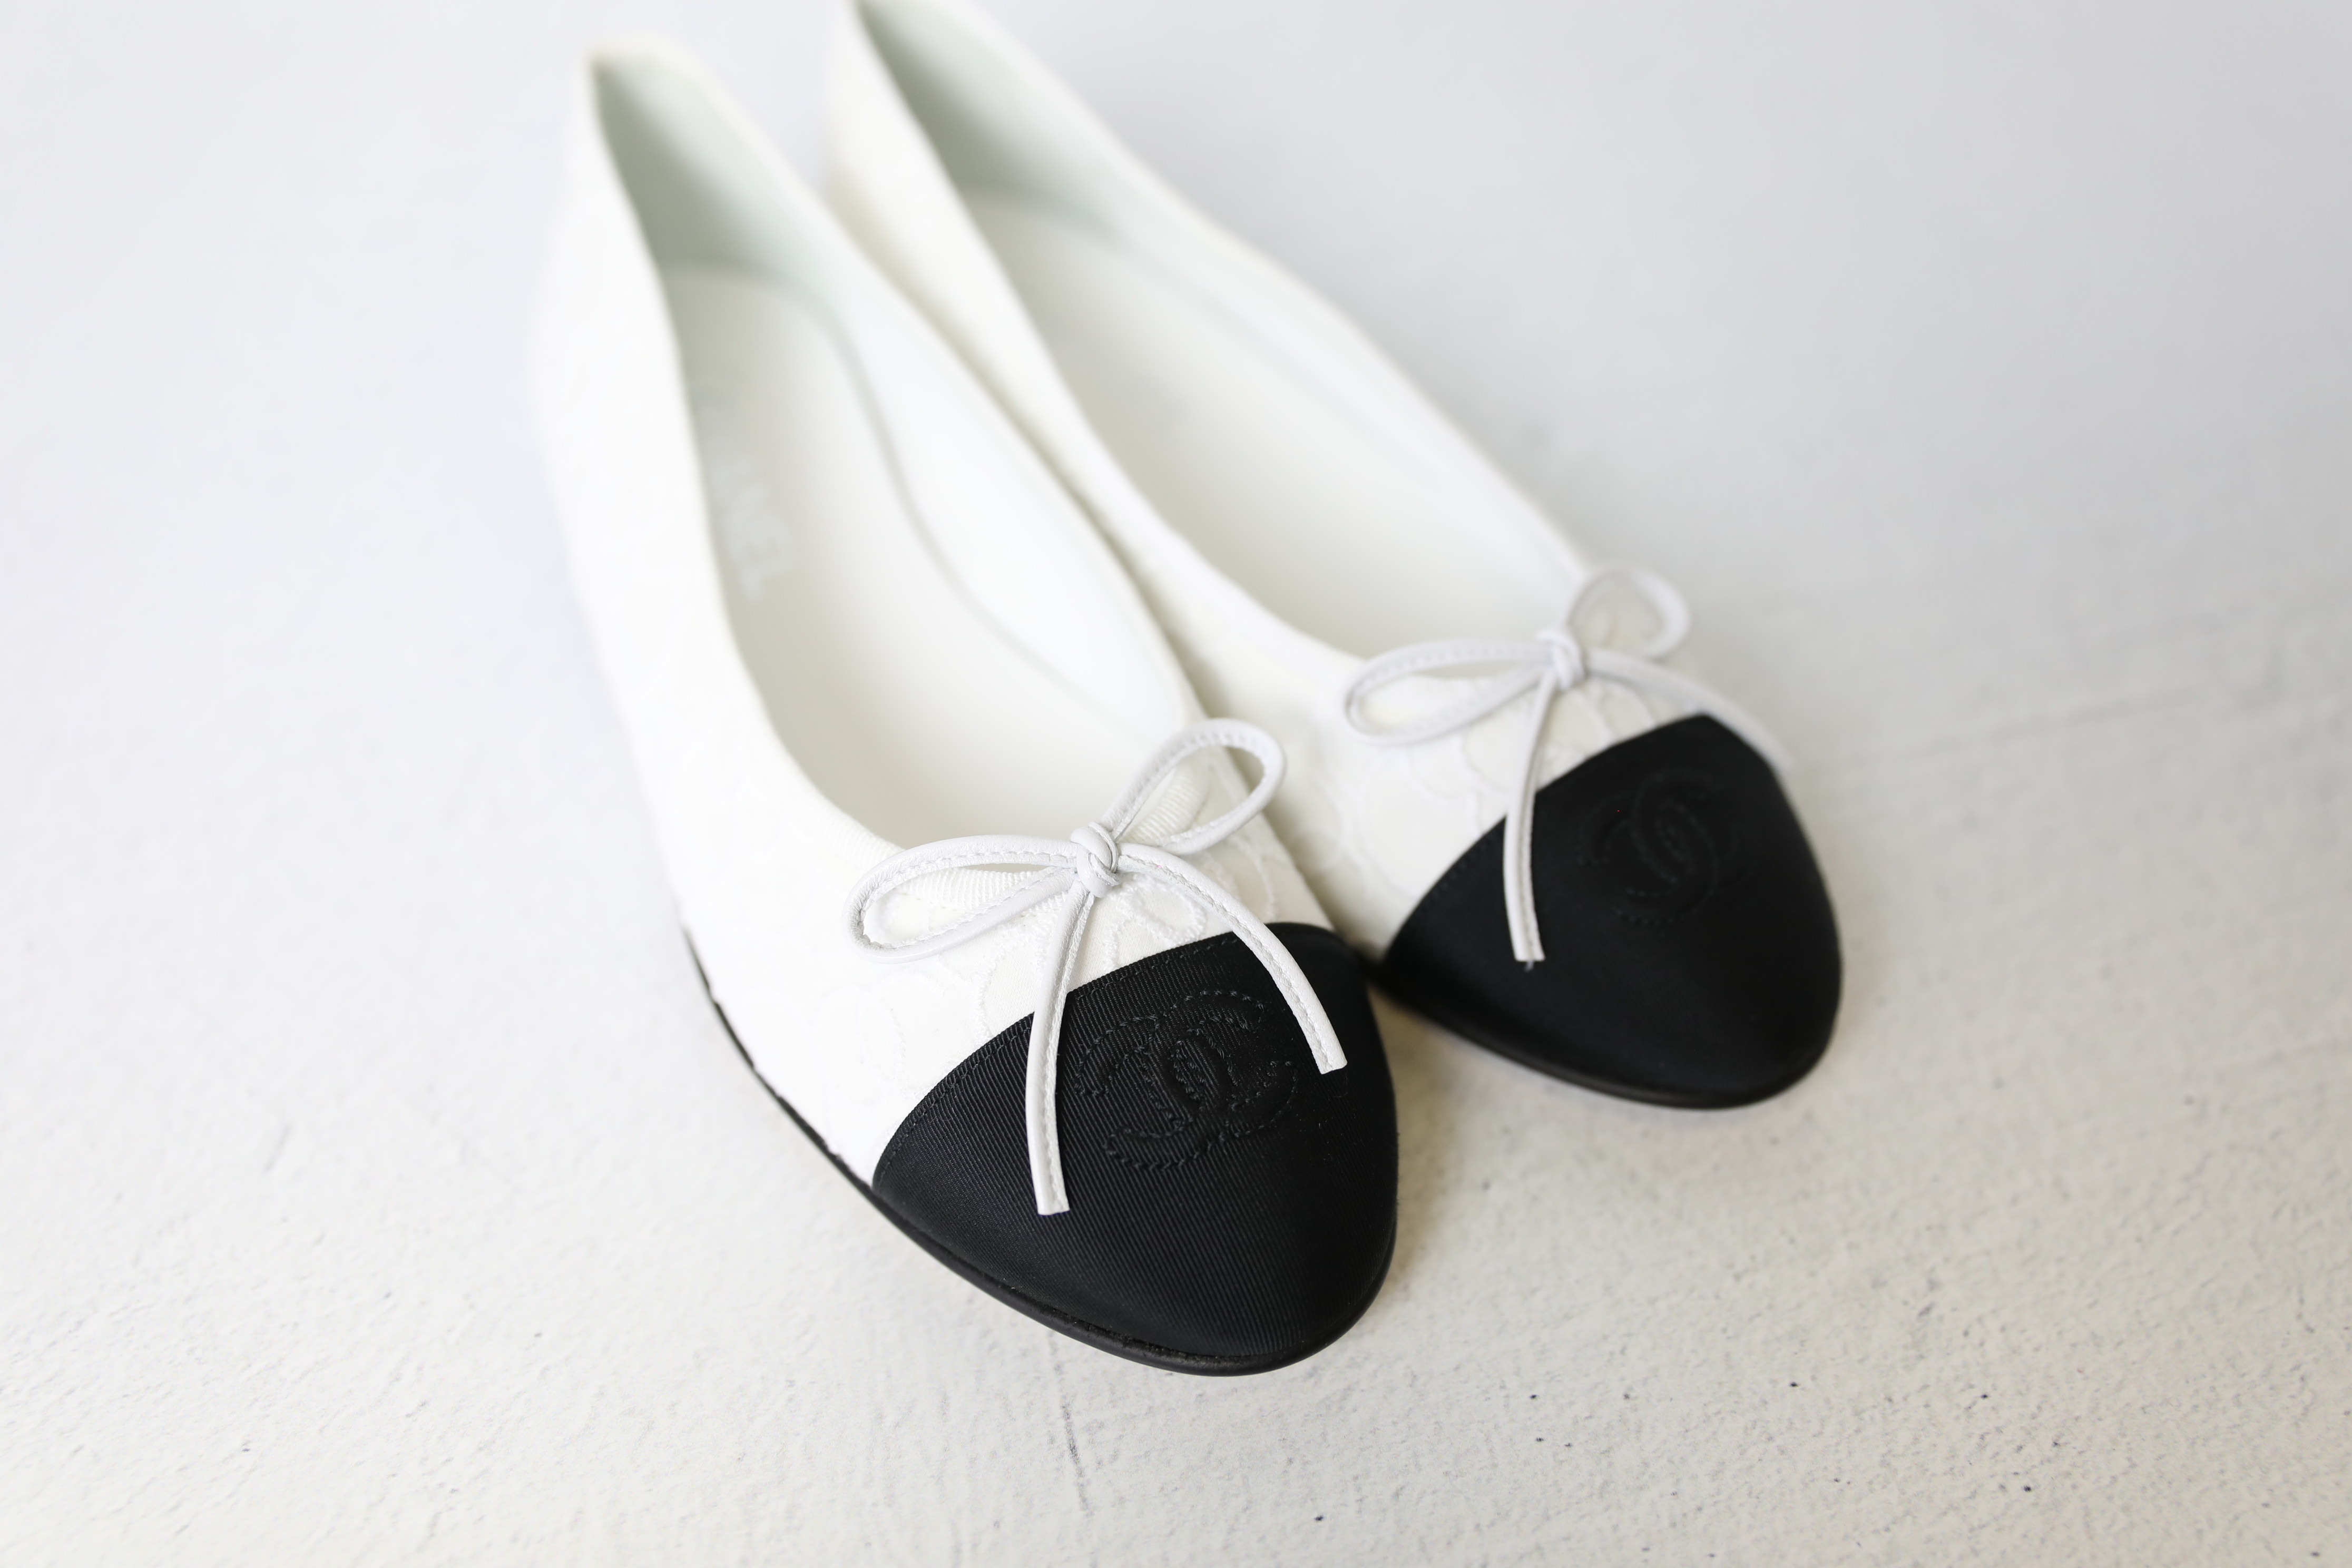 Chanel Ballet Flats, White and Black, Size 39, New in Box WA001